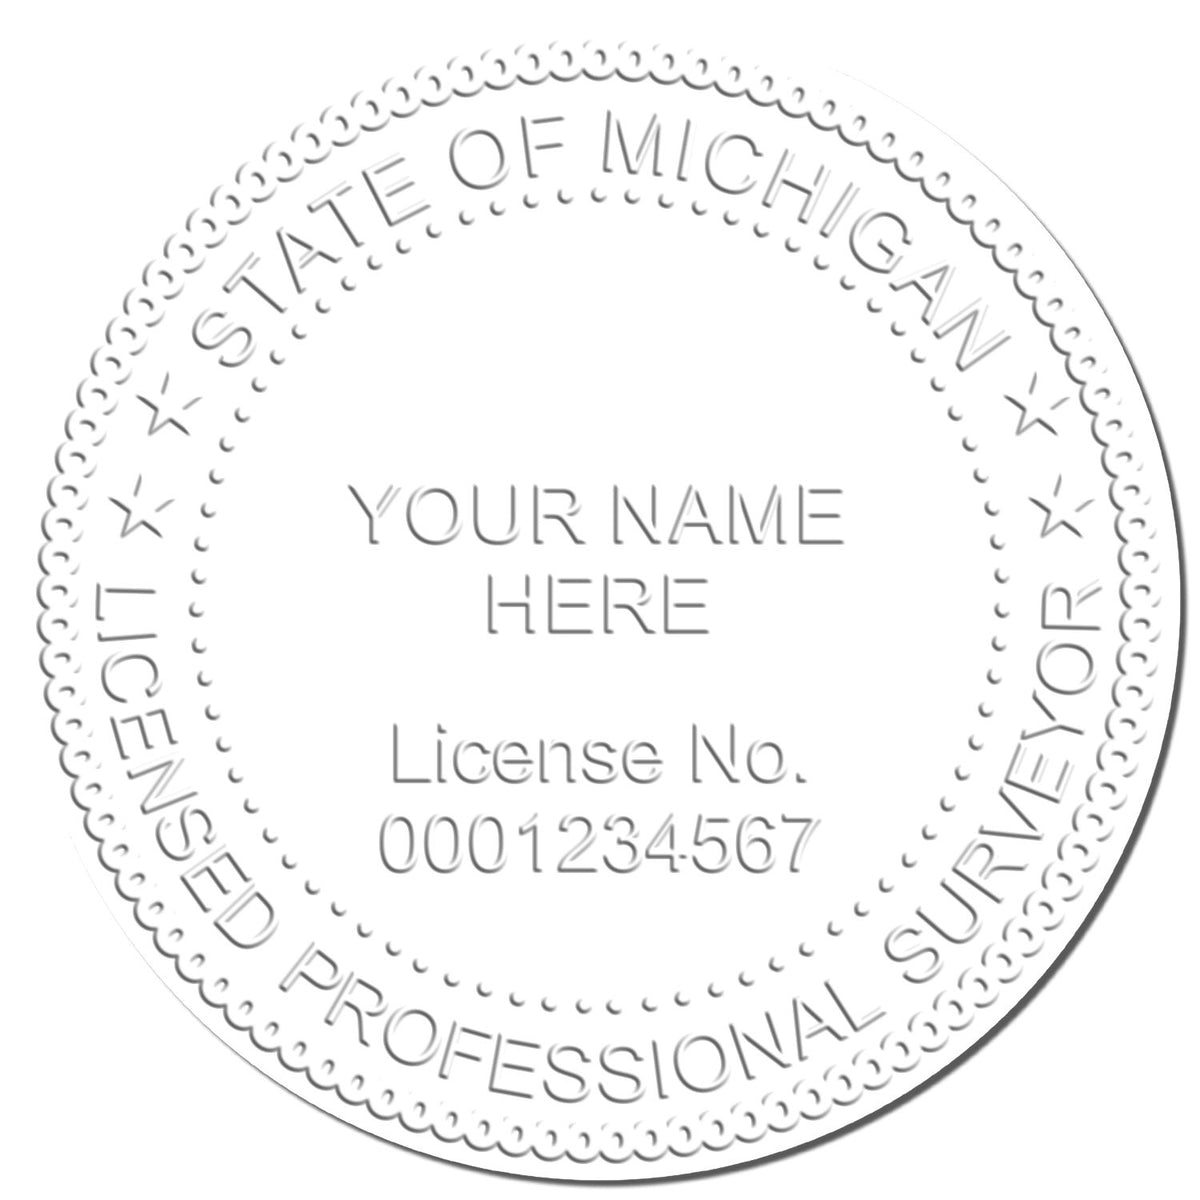 This paper is stamped with a sample imprint of the Michigan Desk Surveyor Seal Embosser, signifying its quality and reliability.